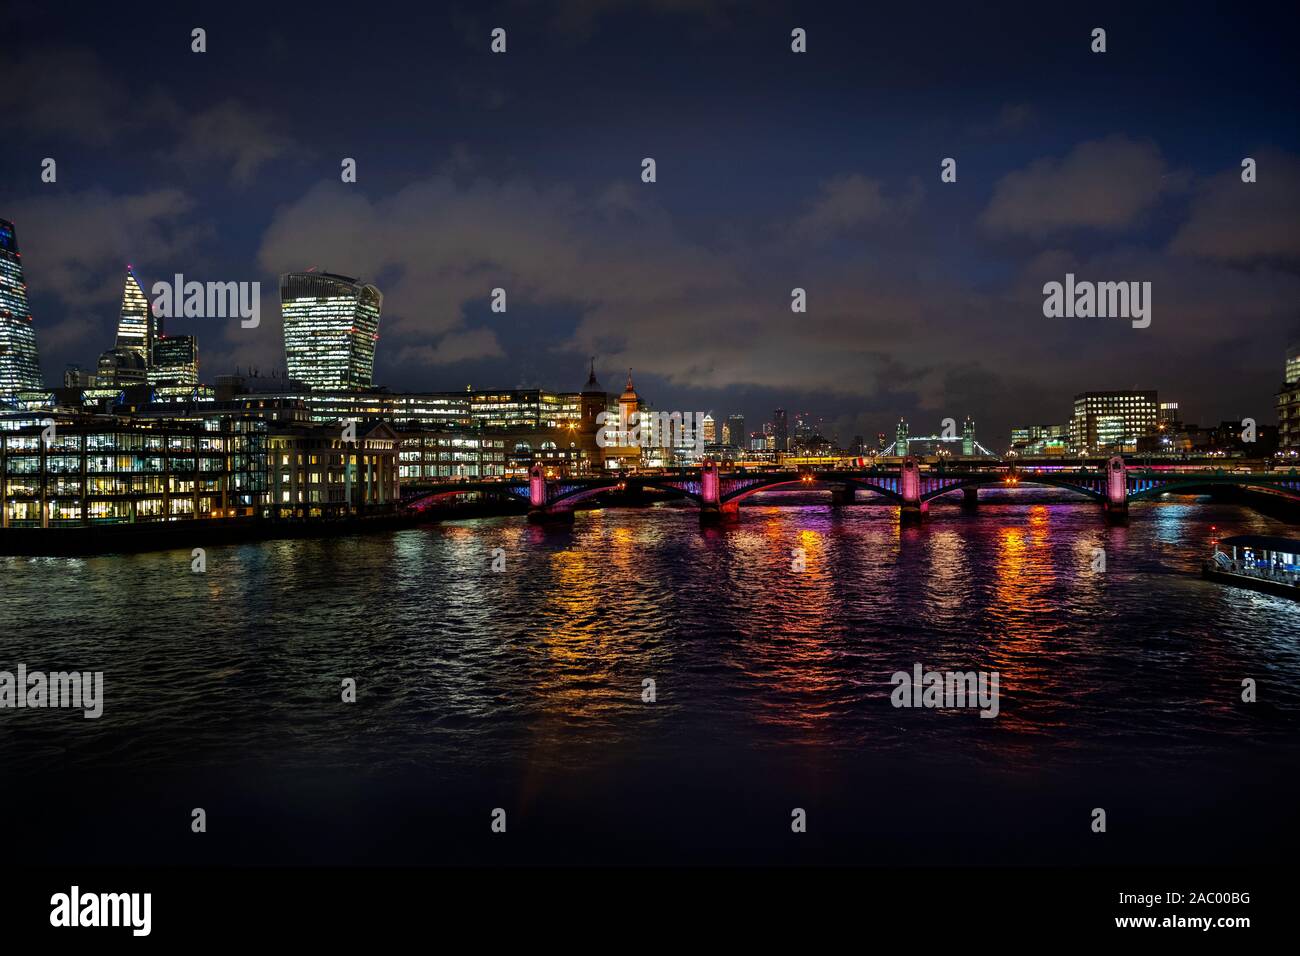 City of London England at night showing Tower Bridge and the Walkie Talkie building at dusk. Nov 2019 Stock Photo